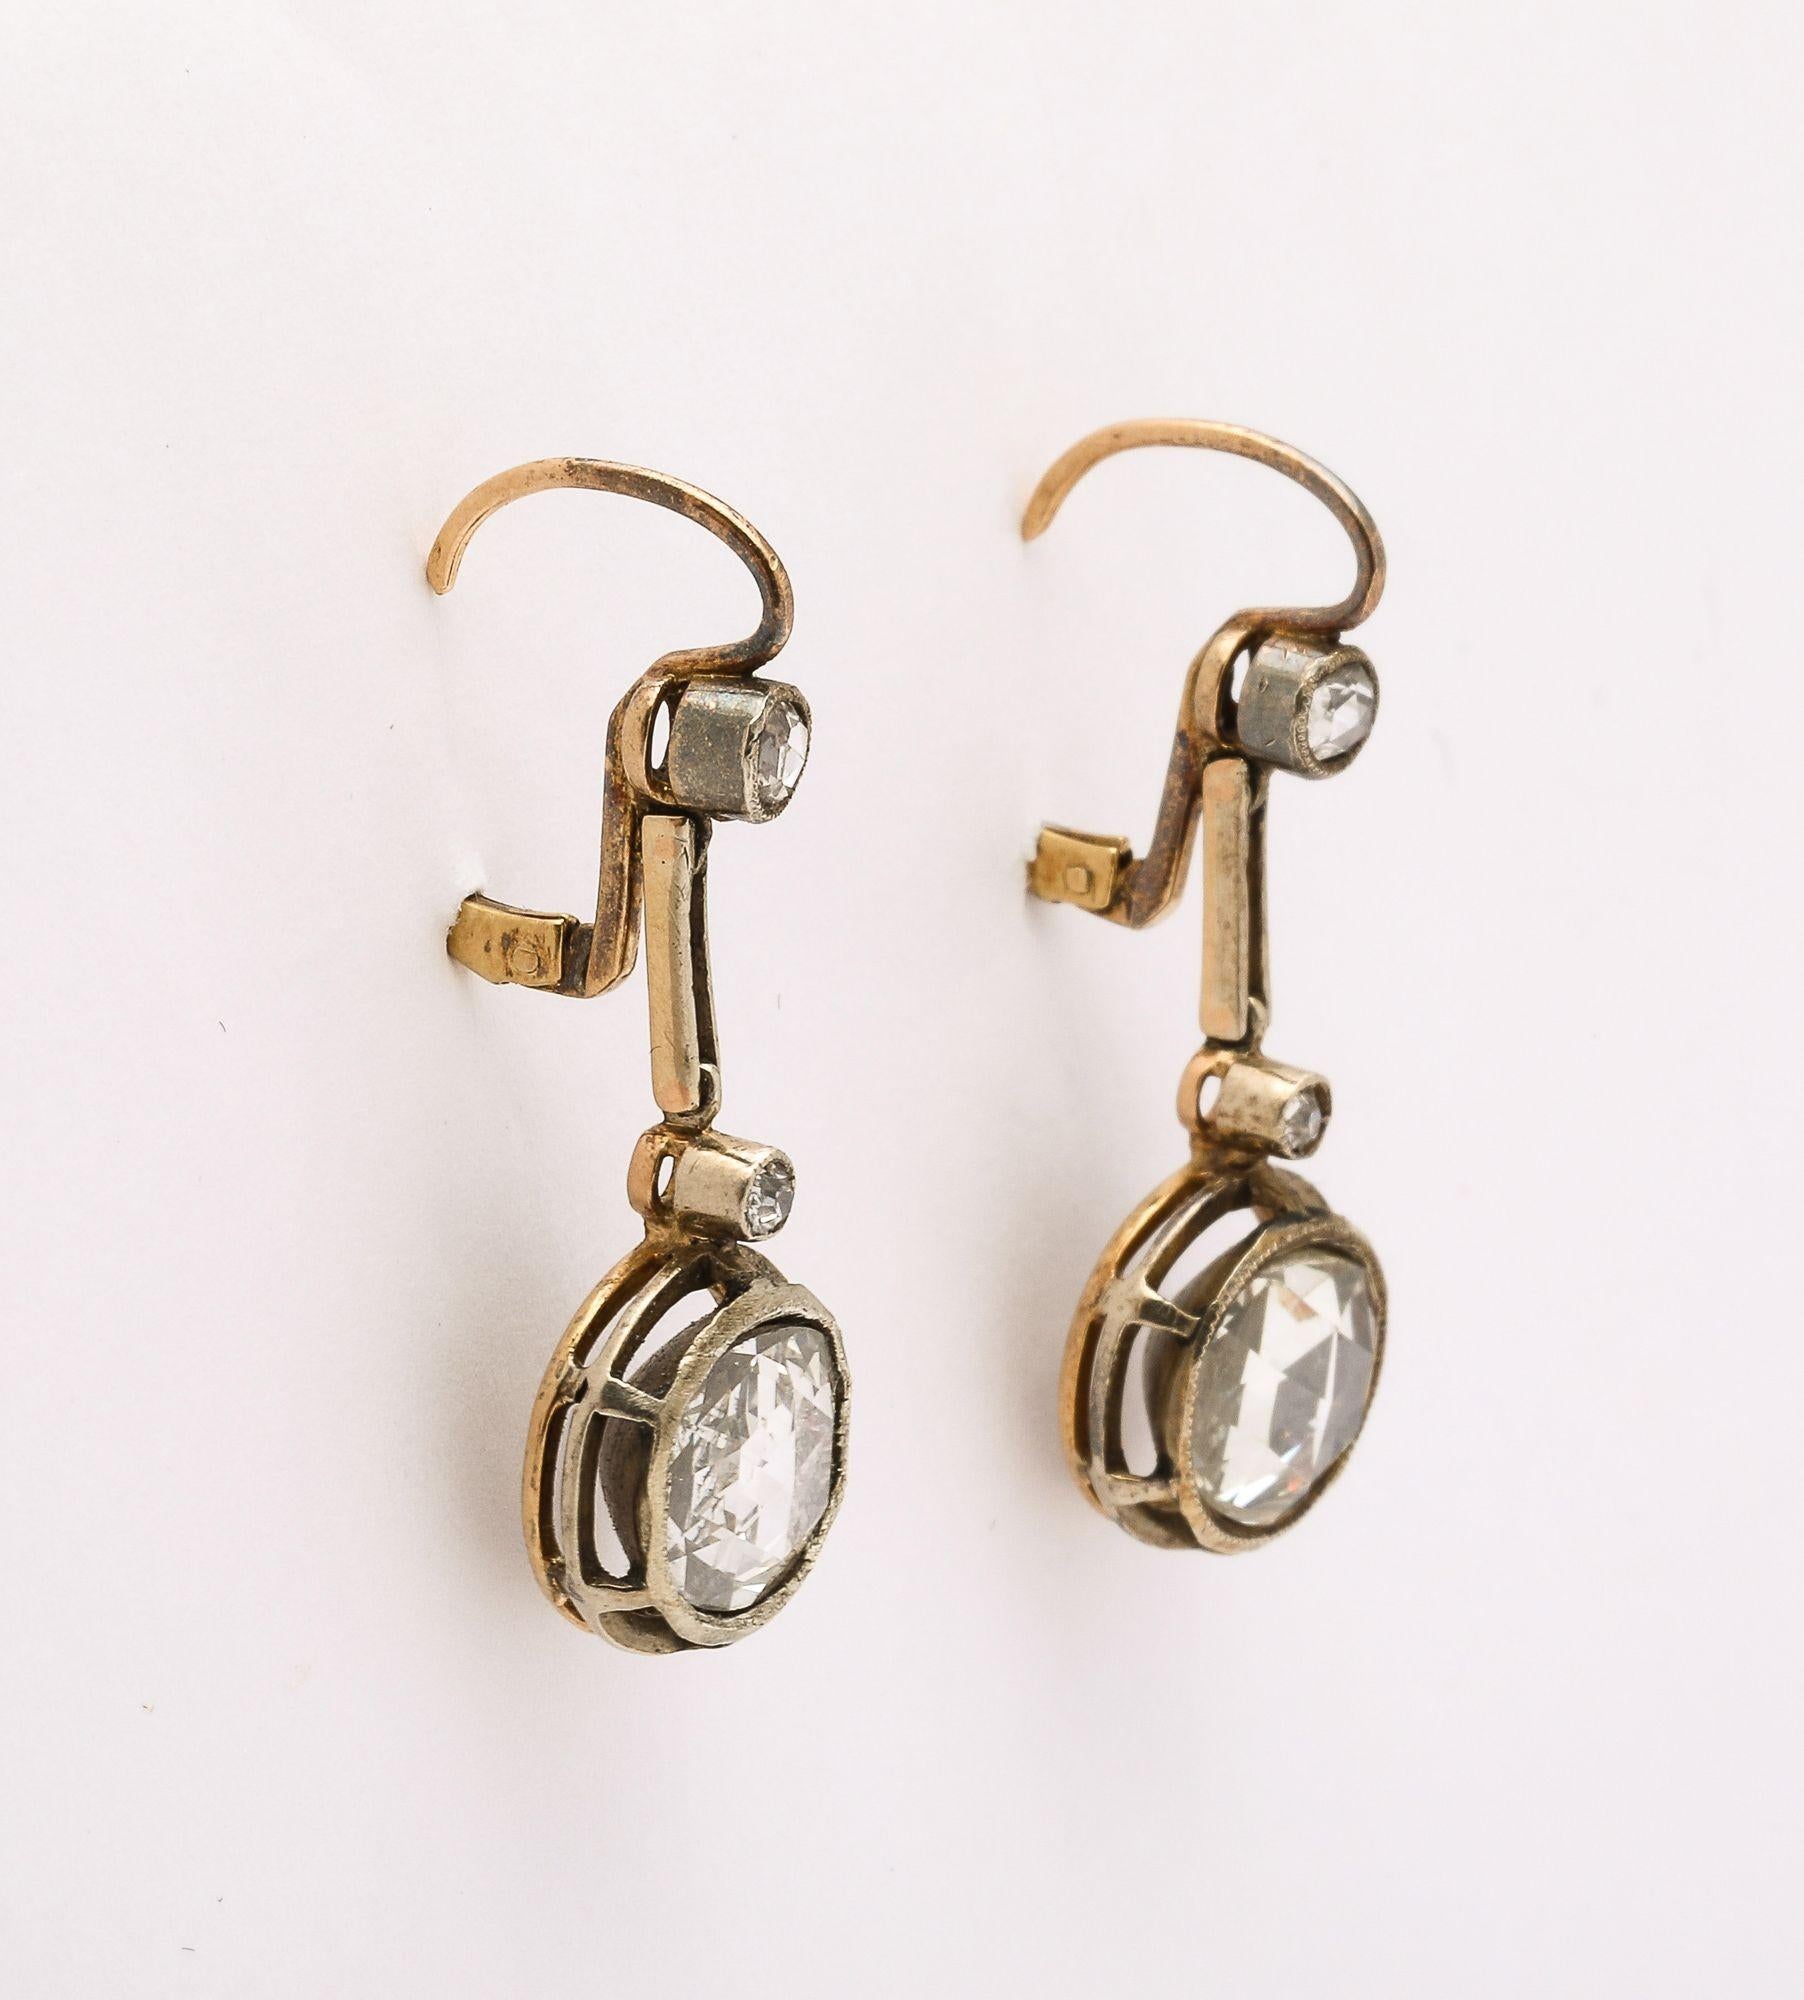 A stunning significant pair of Antique French Rose Cut Diamond Dangle Earrings. Large antique stones capped with smaller rose cut diamonds set in gold